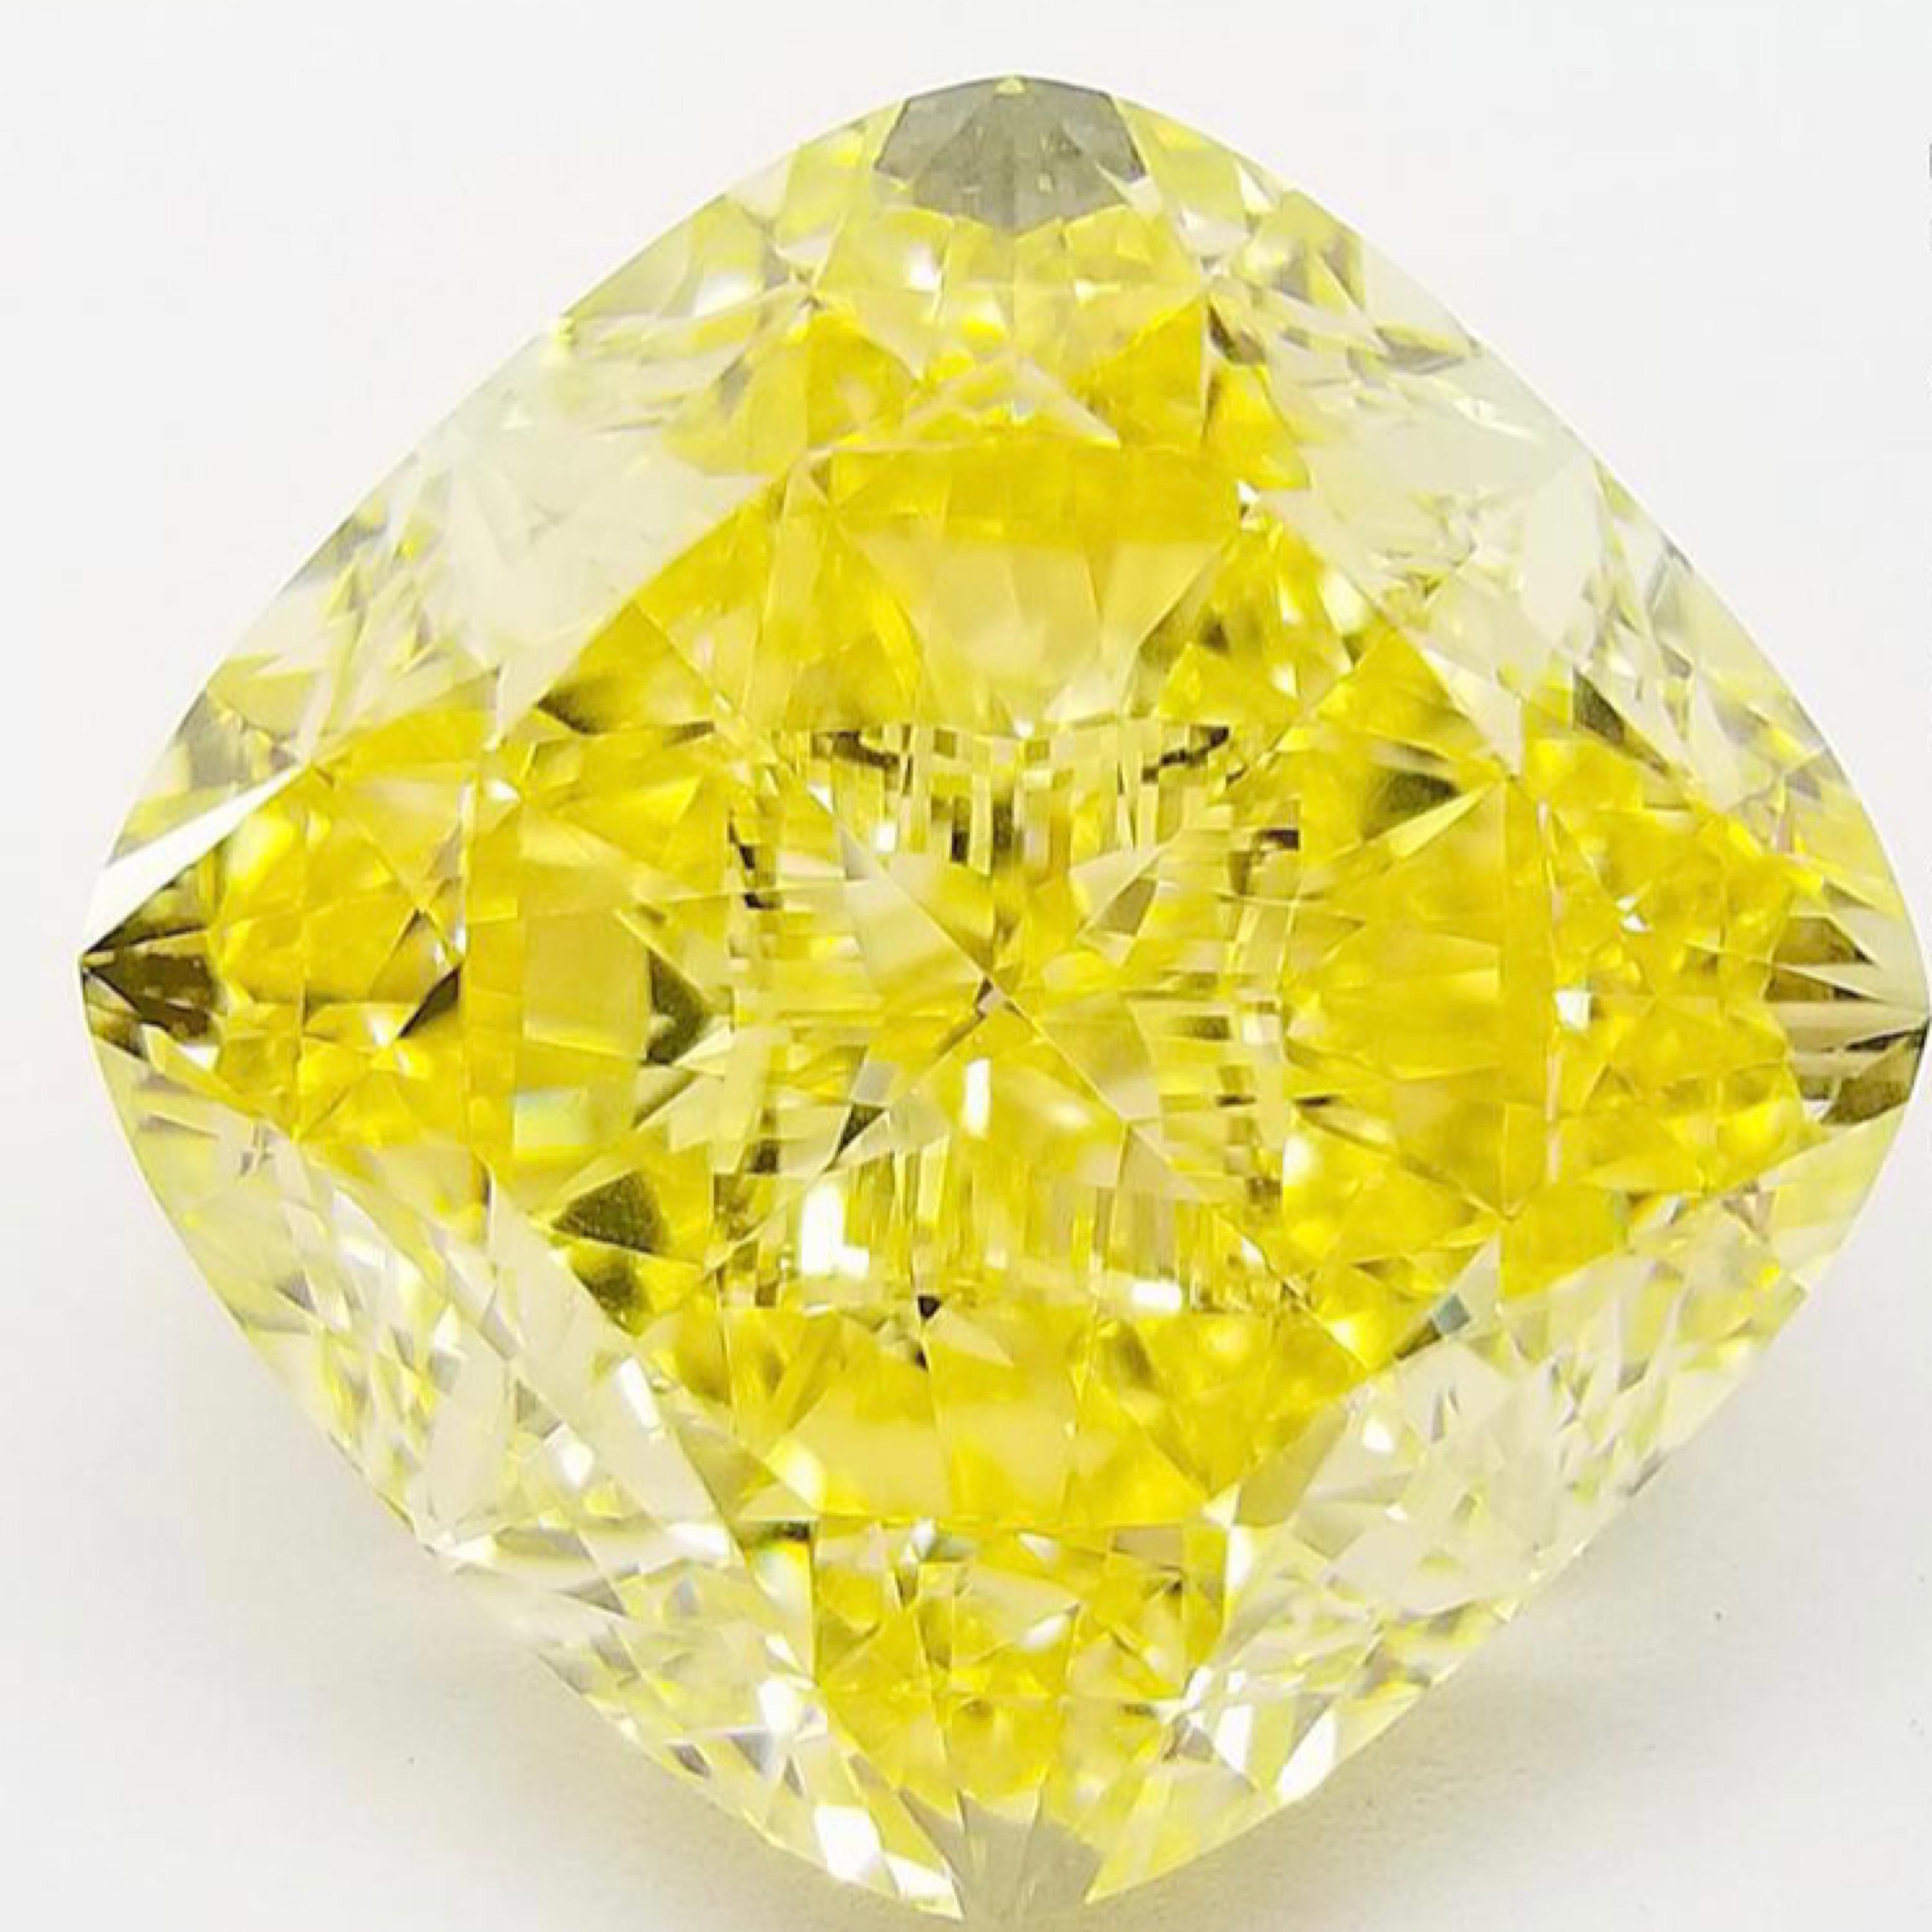 From The Museum Vault at Emilio Jewelry Located on New York's iconic Fifth Avenue,
Showcasing a very special and rare Gia certified natural fancy intense yellow diamond, Flawless!! 
We specialize in creating special mountings for yellow diamonds